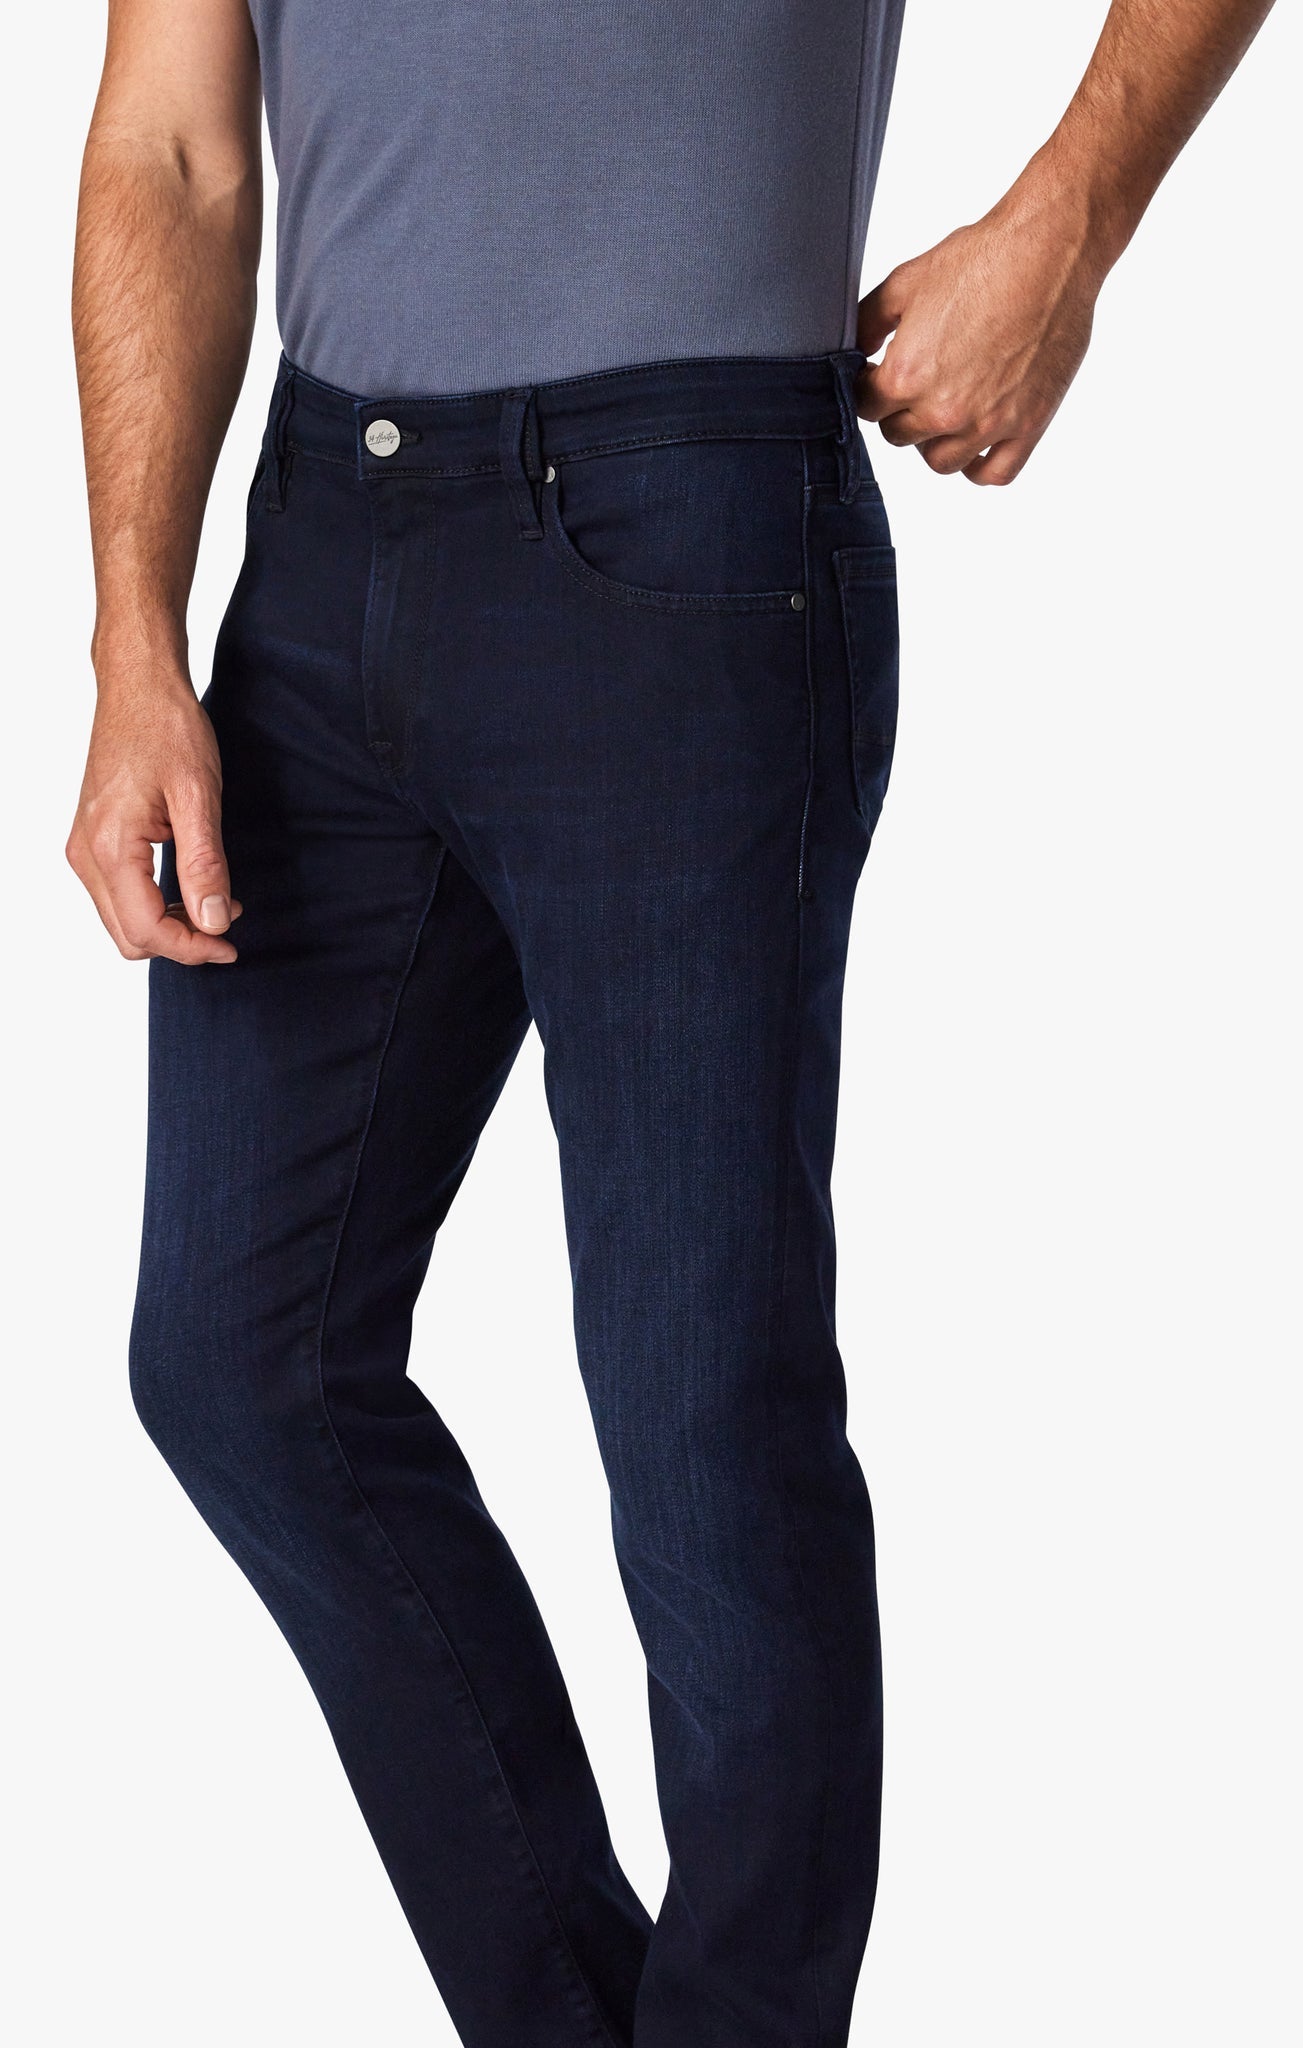 A classic, straight-leg jean in a high-rise fit. Stretchy, premium fabric with a dark, clean wash. Luxury, comfort, sophistication and style that can transition from day to night when paired with a classic sports coat.